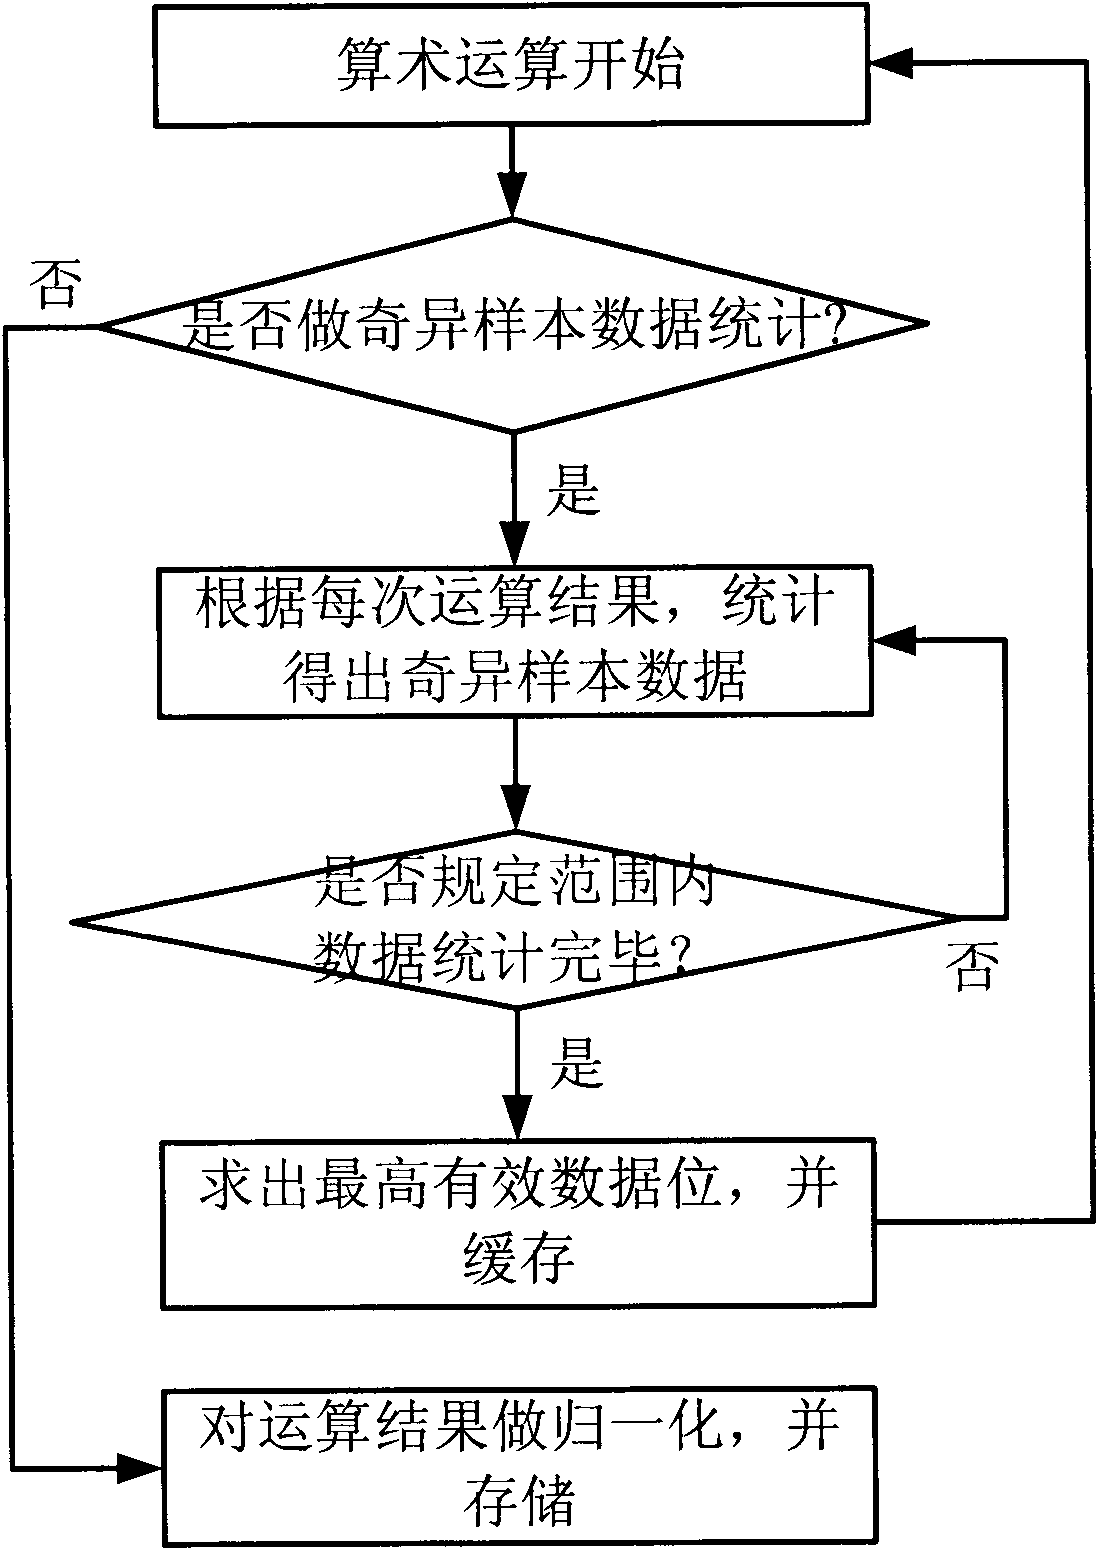 Method for performing data normalization processing by use of DMA (direct memory access) controller